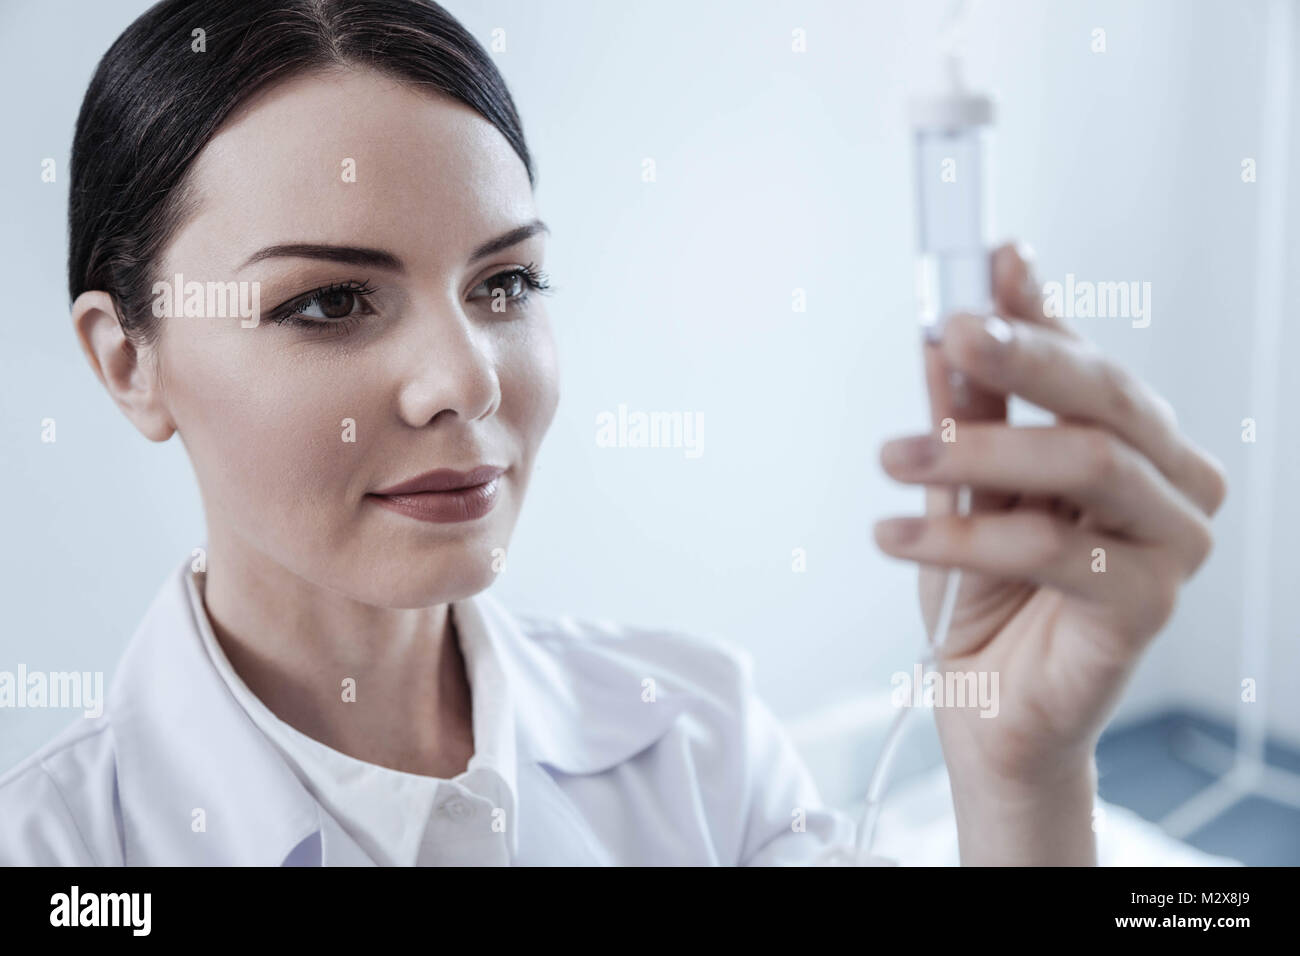 Cheerful female doctor checking drop counter in hospital Stock Photo